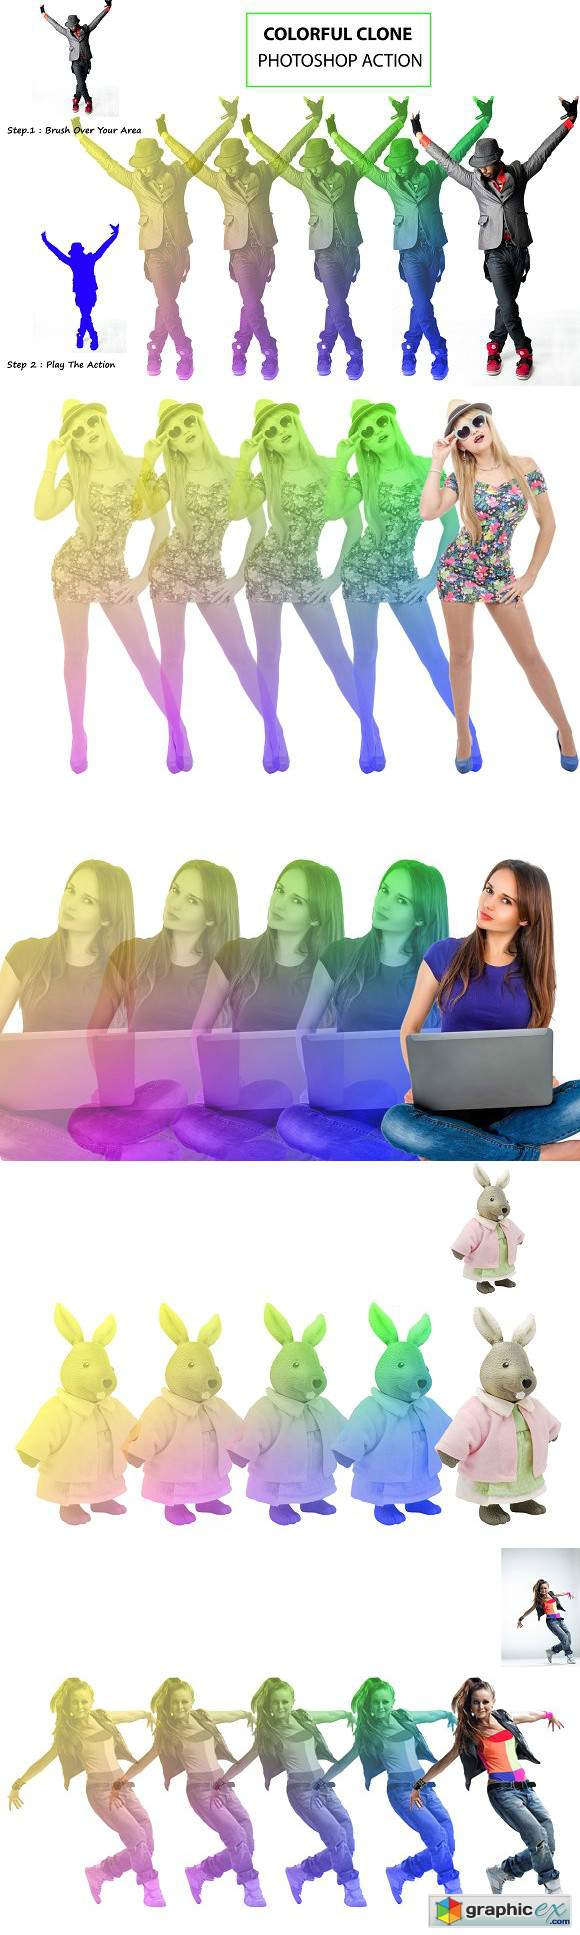 Colorful Clone Photoshop Action